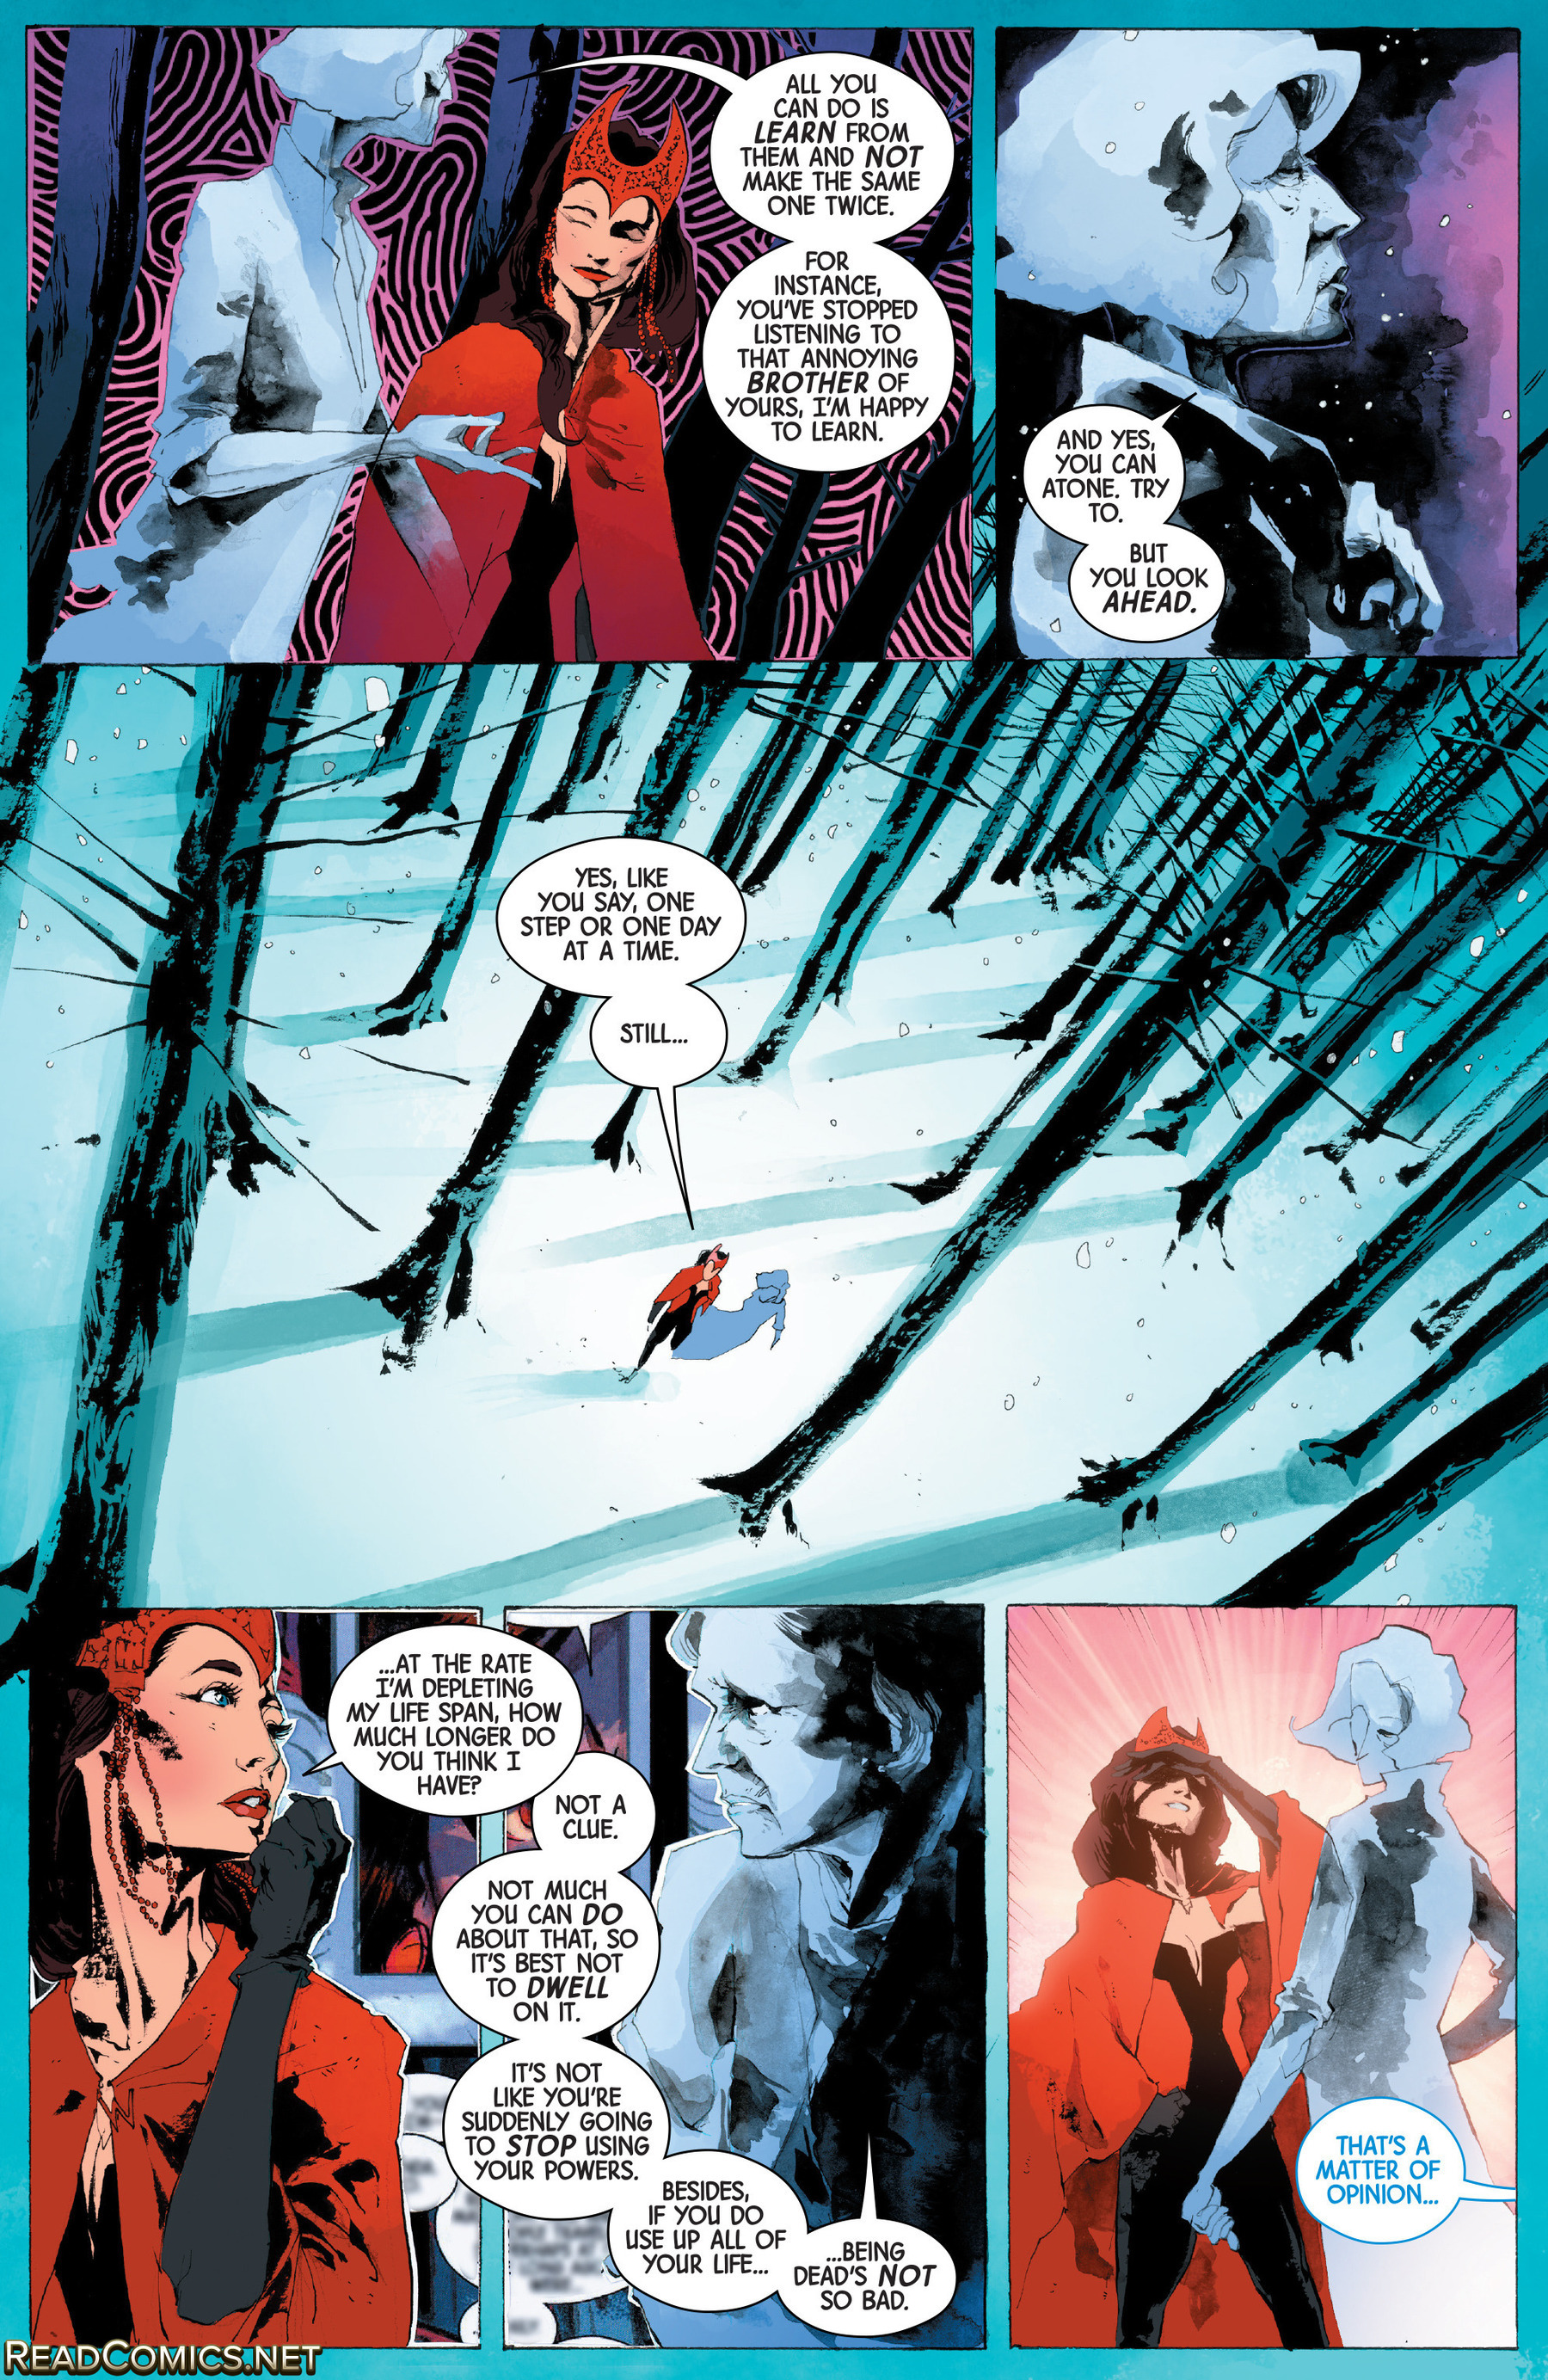 Scarlet Witch (2015) #1, Comic Issues